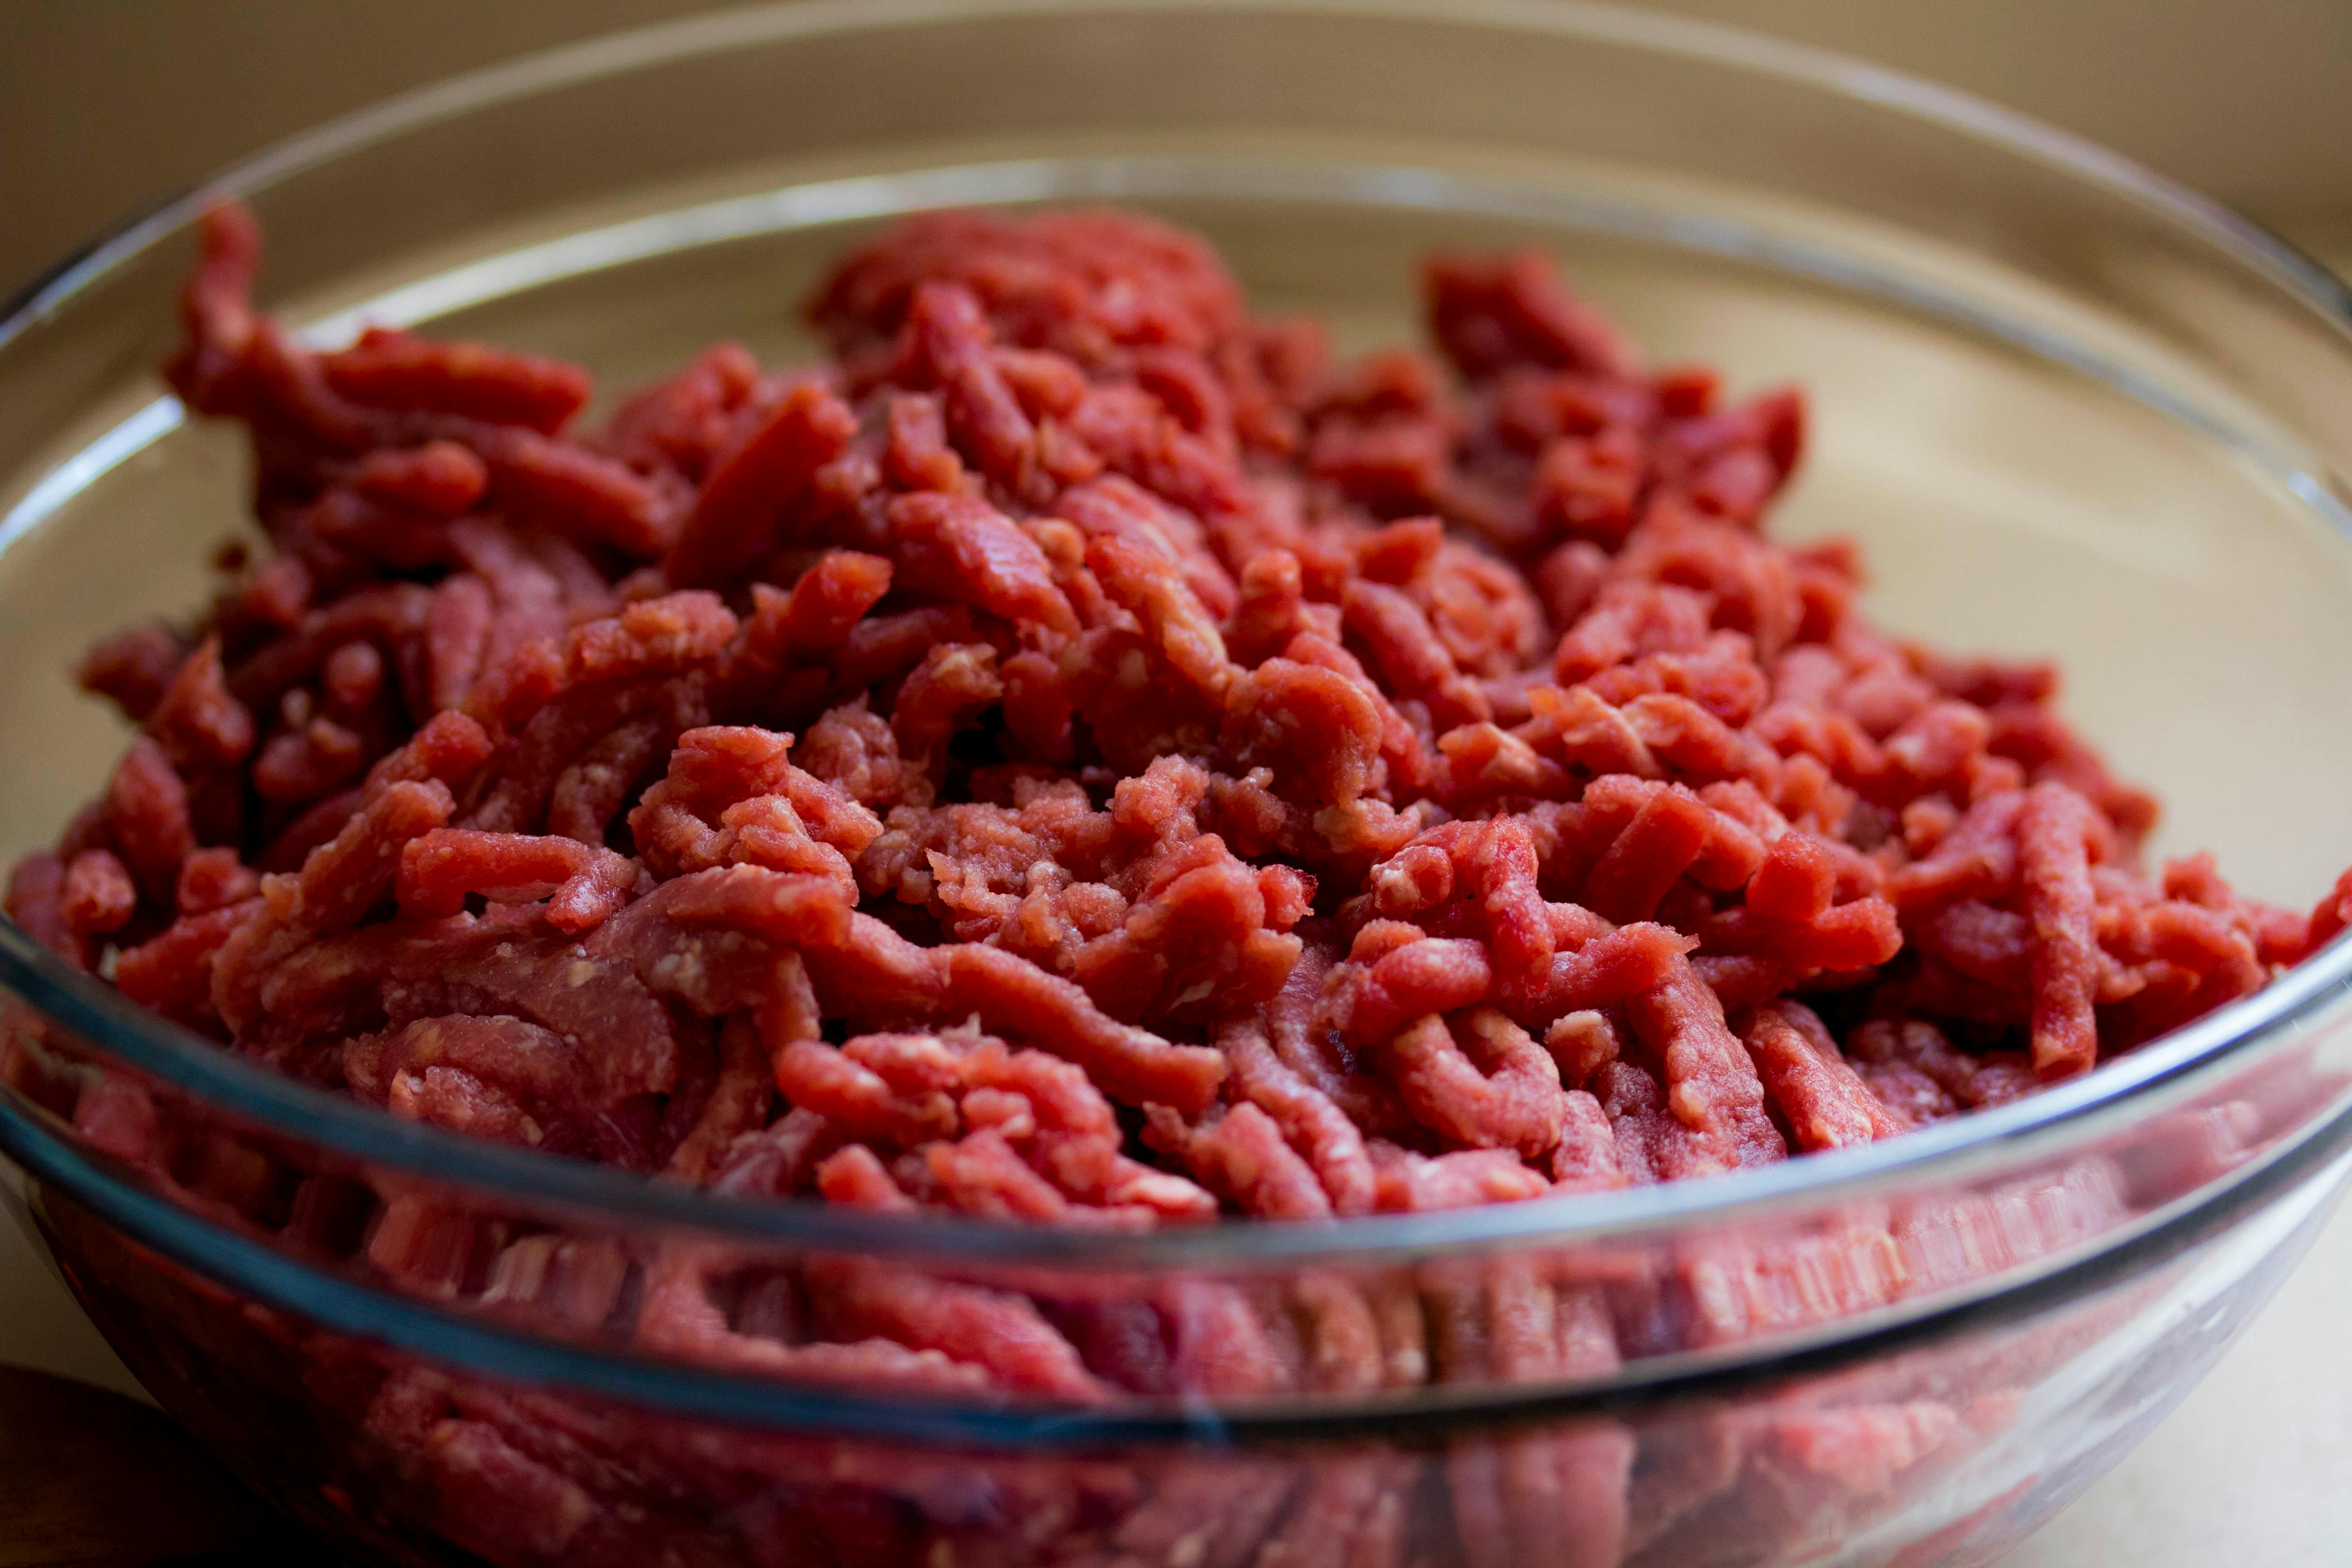 A bowl with ground beef in it.